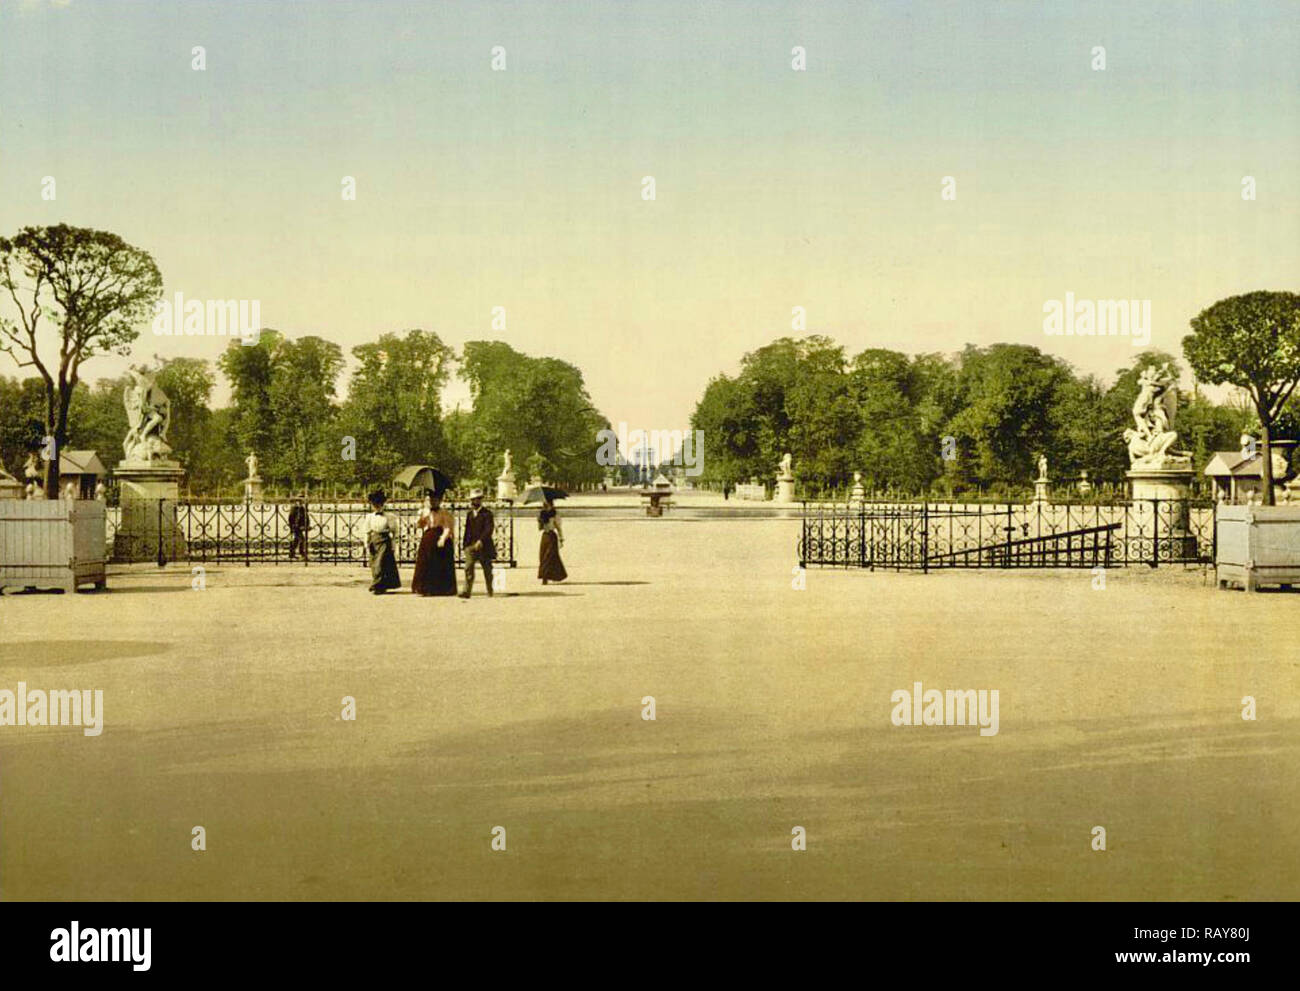 The Tuileries and Champs Elysees, Paris, France 1900. Stock Photo